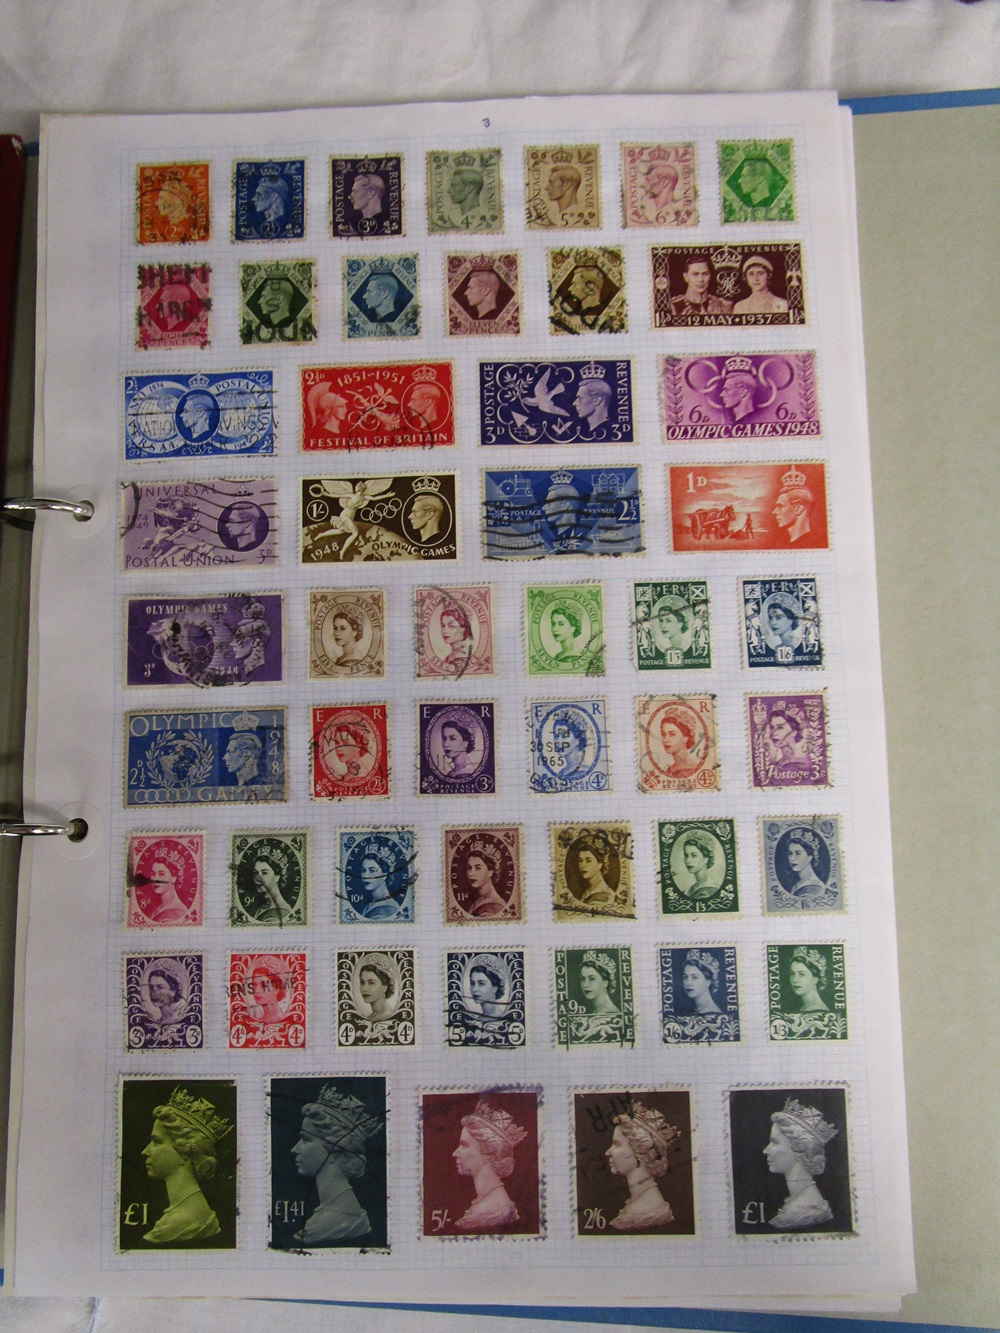 Stamps - 5 GB Albums, QV - QEII, mint & used including regionals - Image 2 of 8